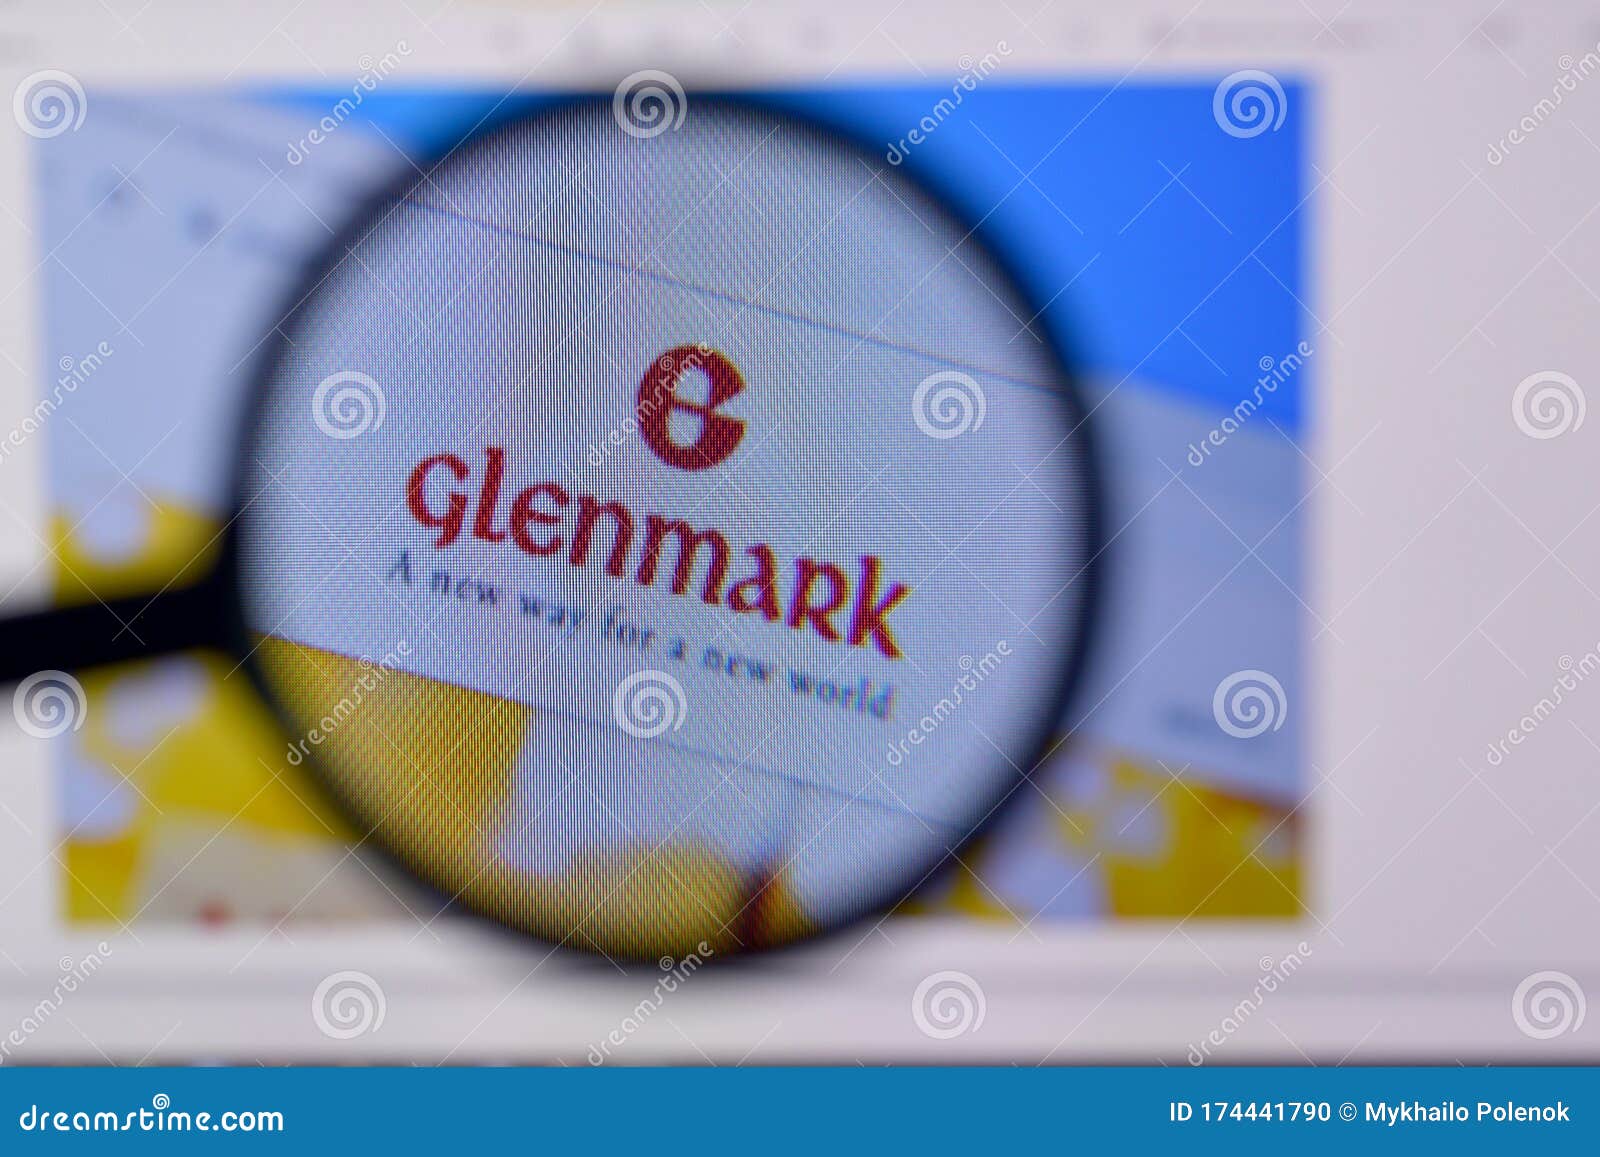 Bausch Health and Glenmark Announce the approval of RYALTRIS® in Canada